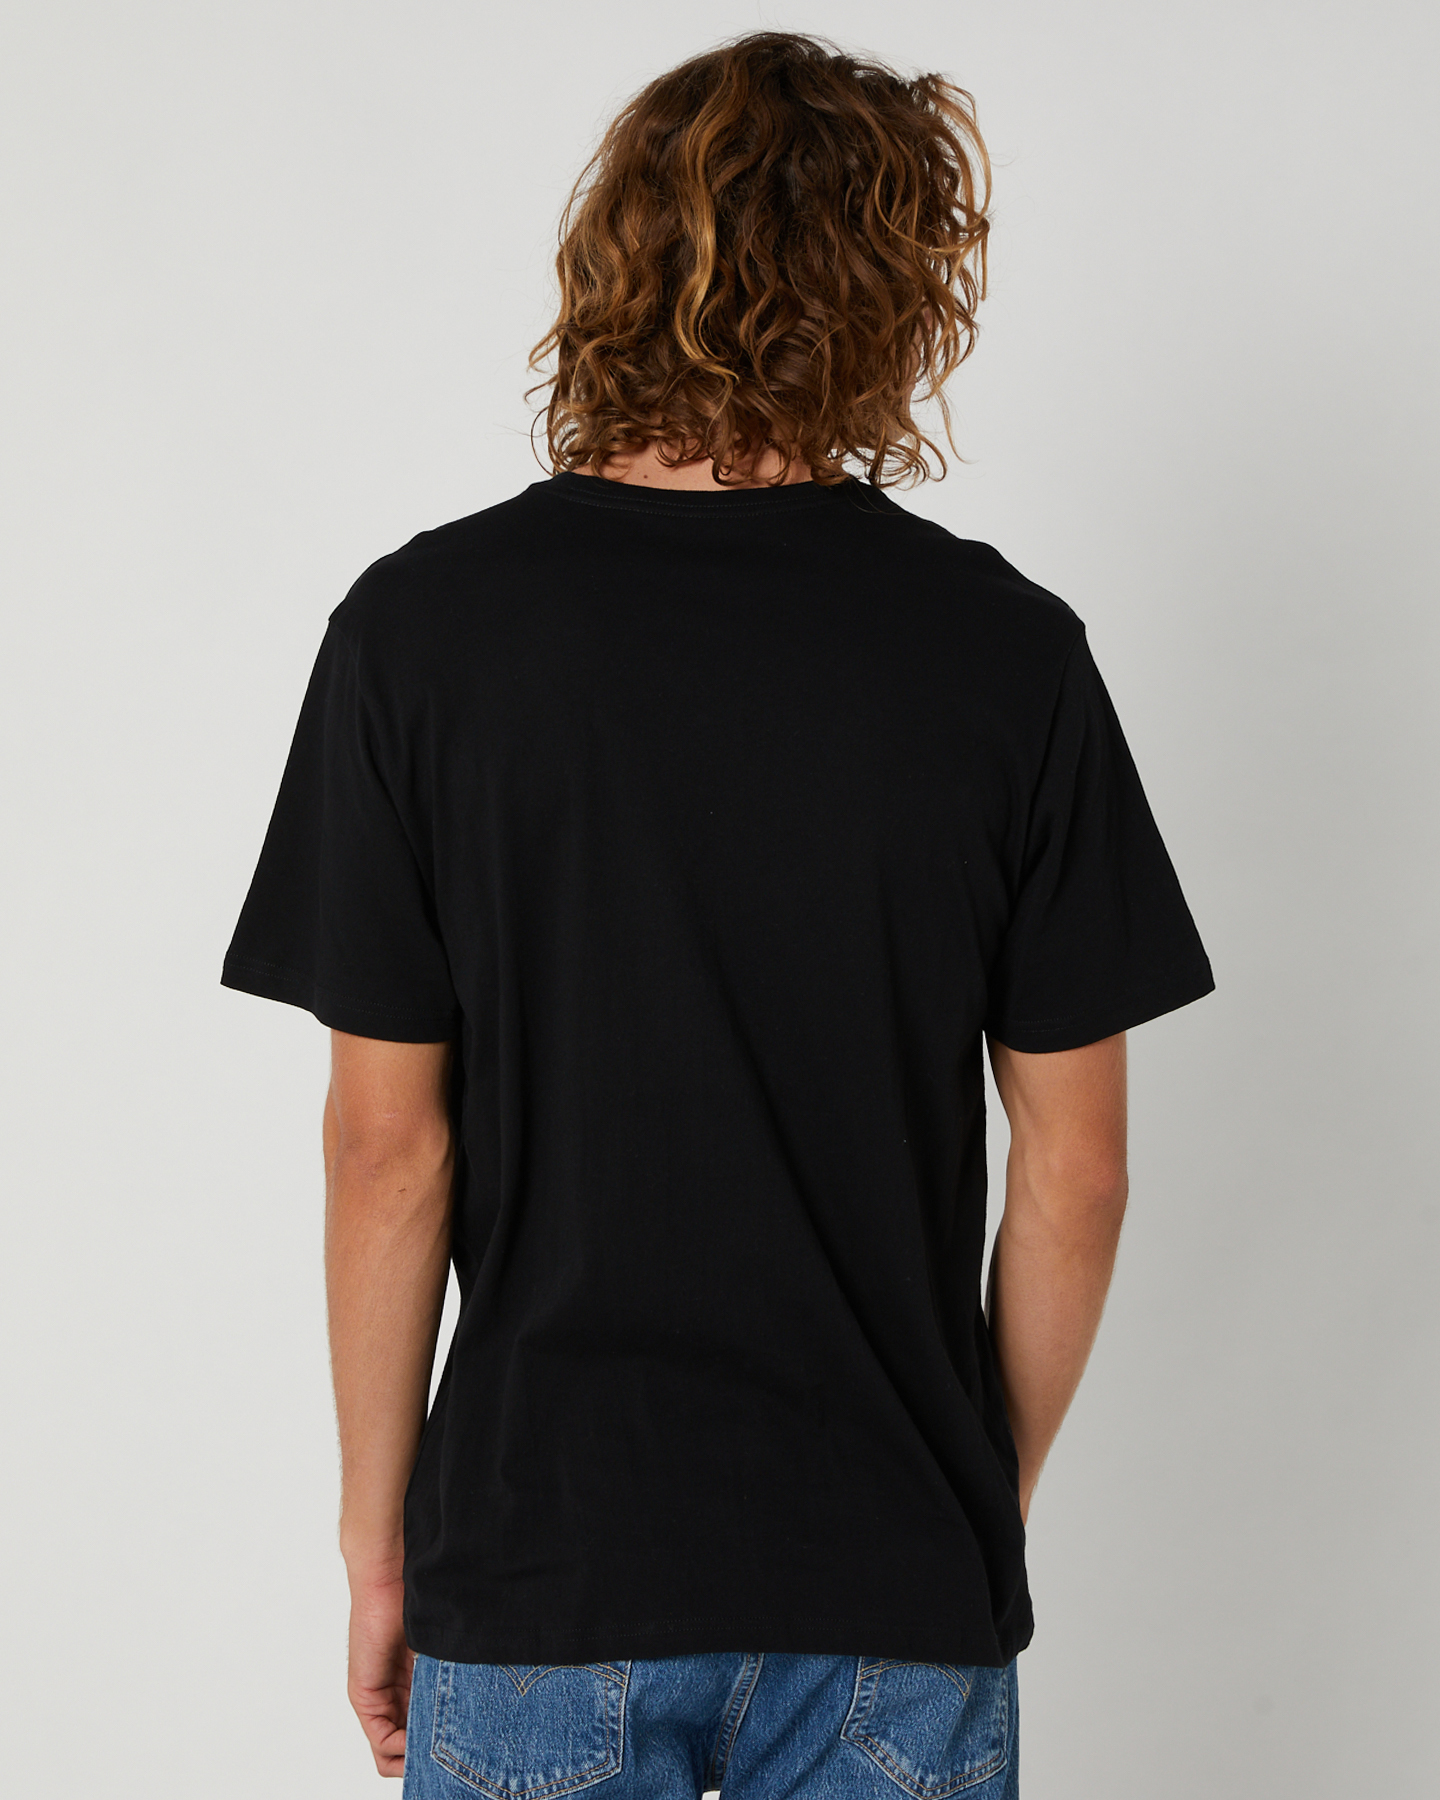 Hurley Evd Wsh Core Oao Solid Mens Tee - Black | SurfStitch